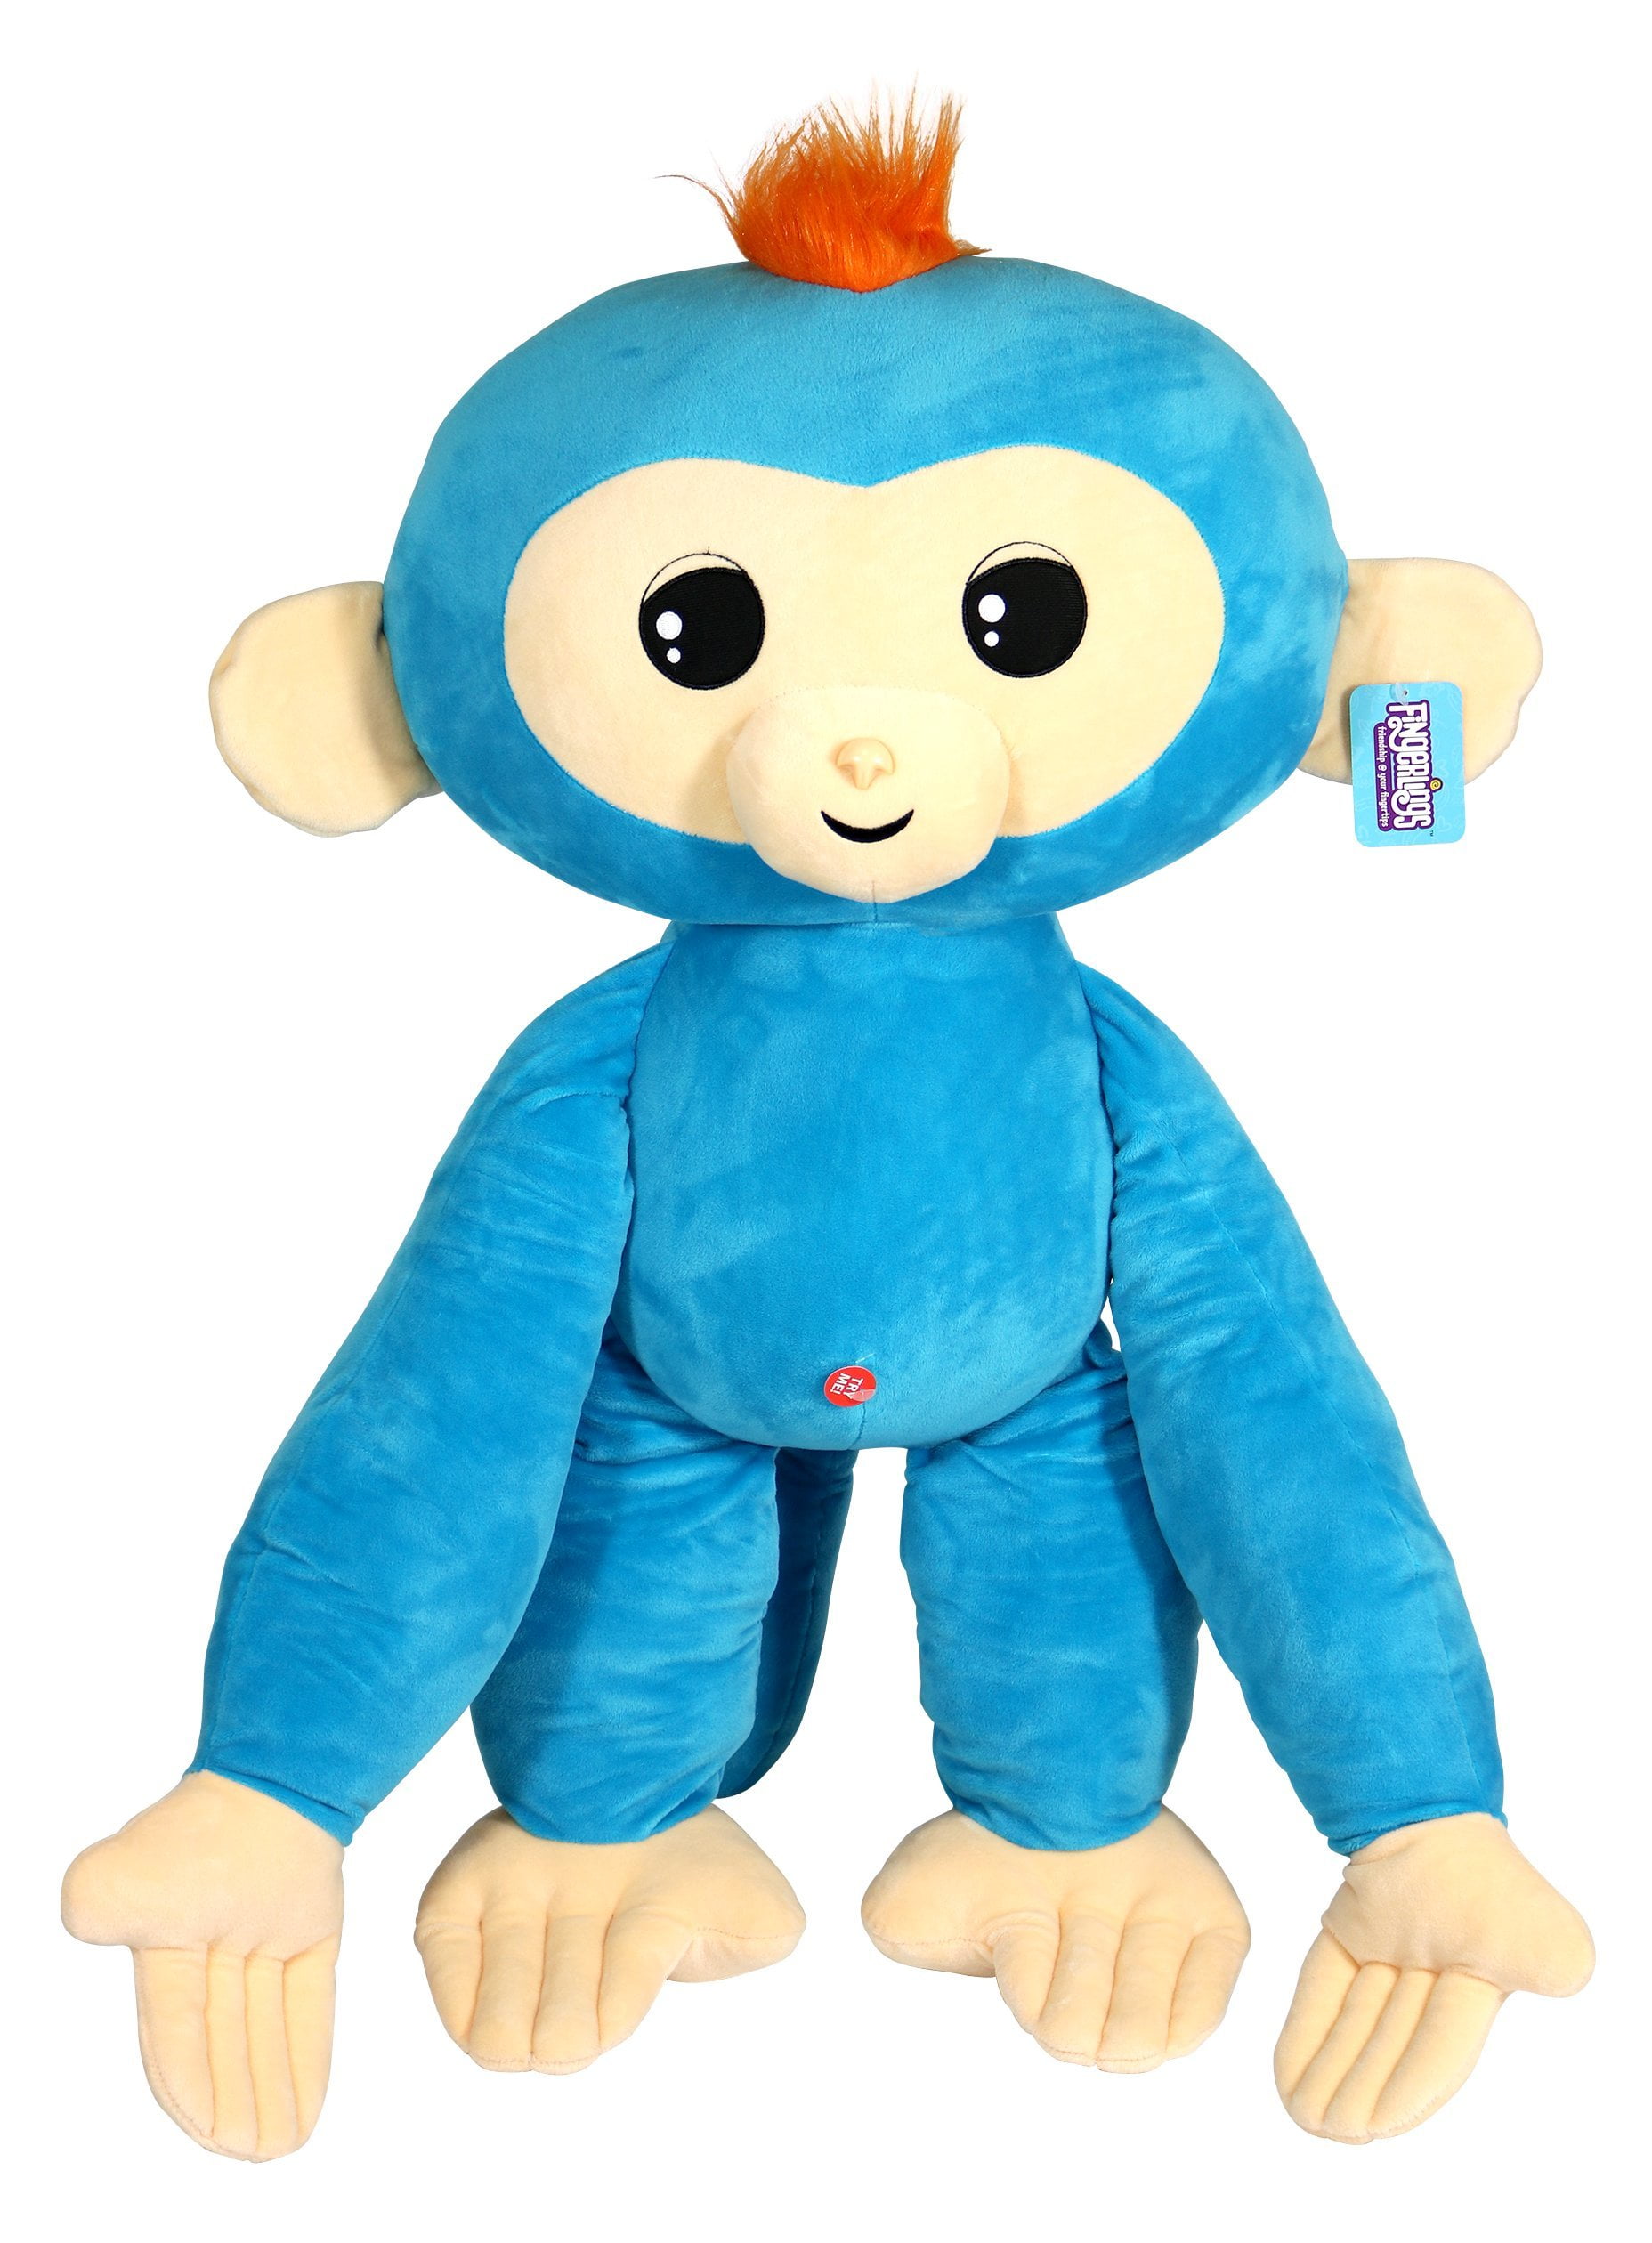 WOWWEE INTERACTIVE BLUE BABY MONKEY BORIS--NEW--FACTORY SEALED 